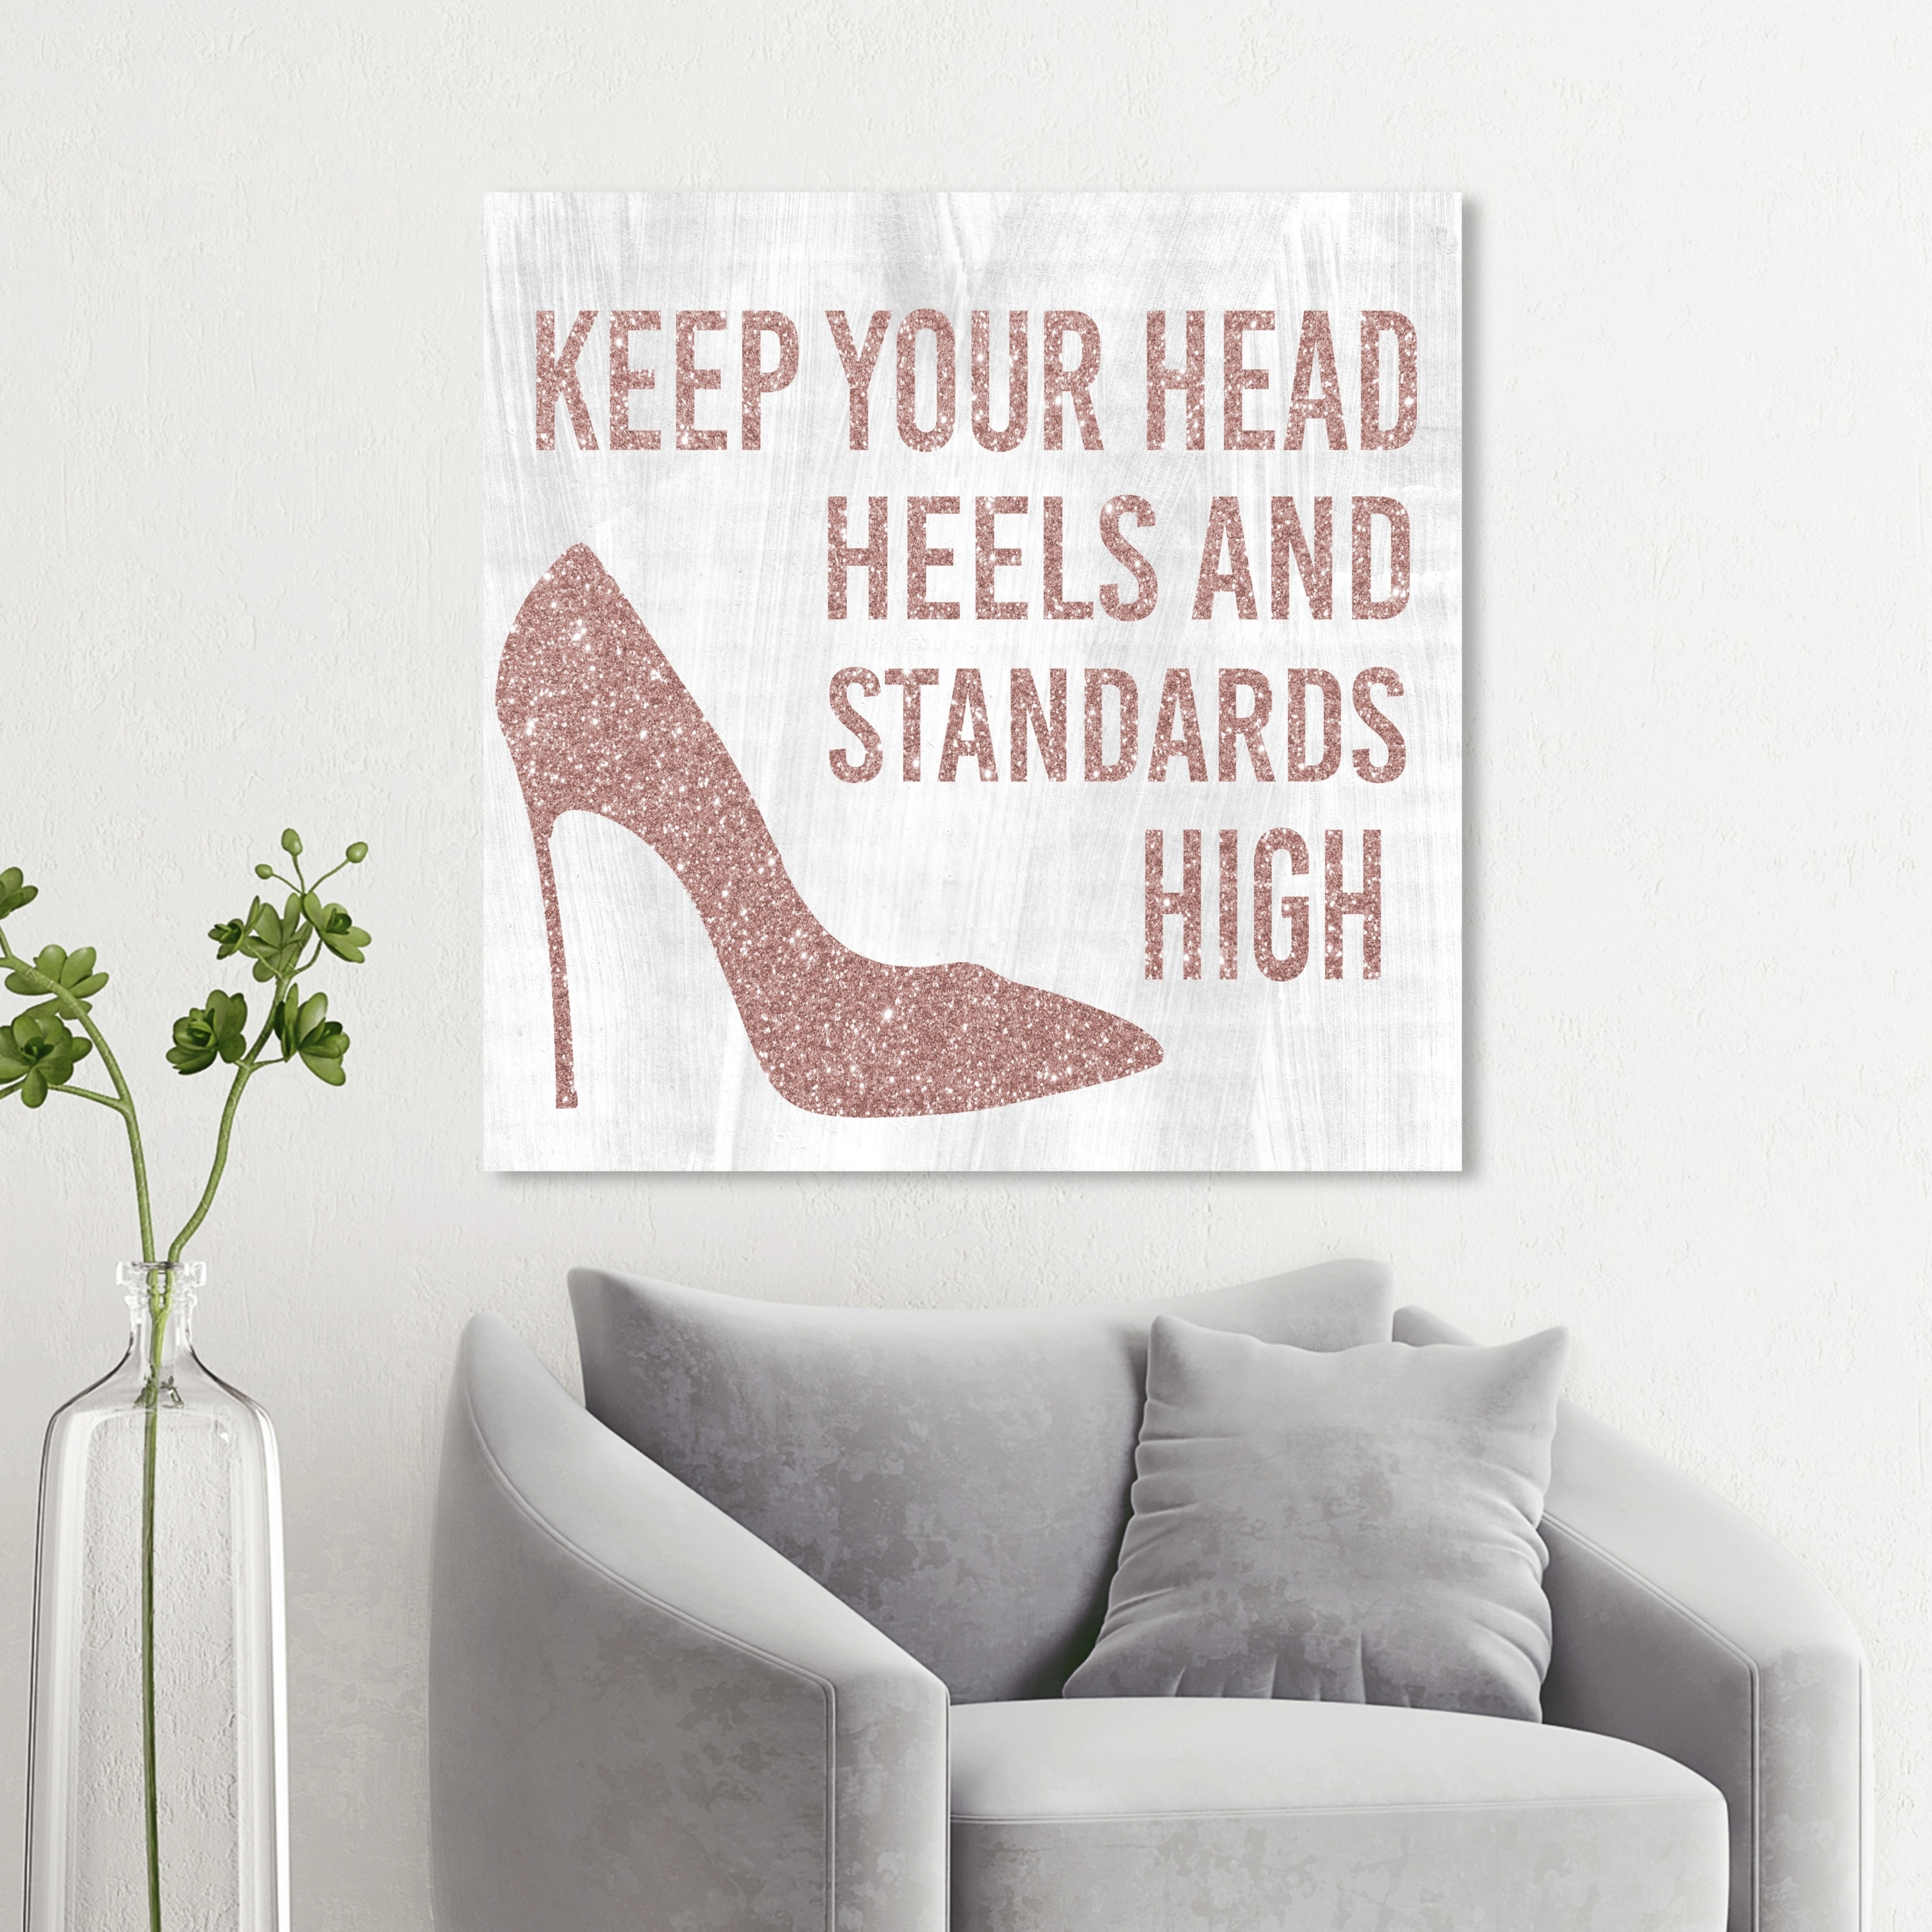 High Heel shoes with funny saying. Stock Photo by ©amarosy 117050978